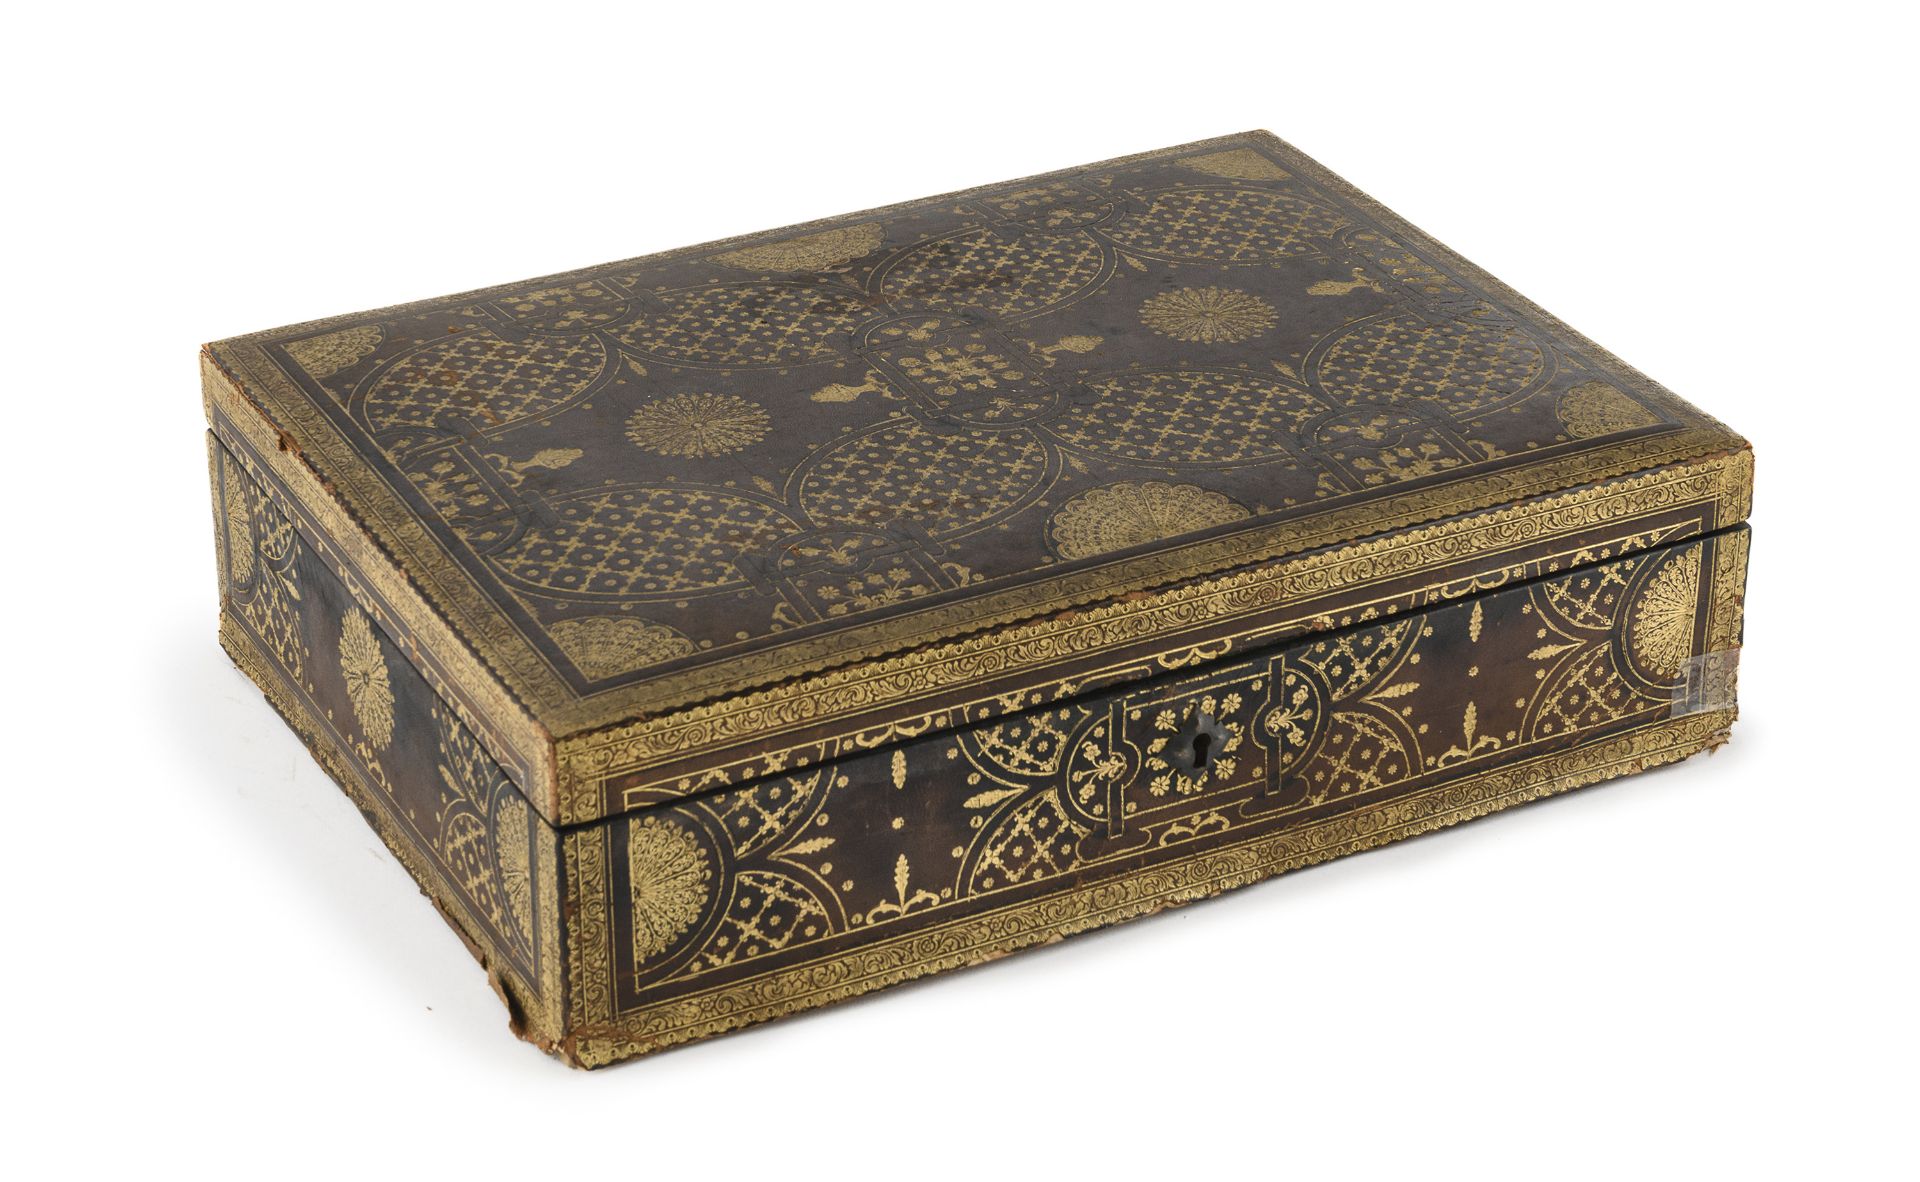 LEATHER WEDDING BOX EARLY 20TH CENTURY